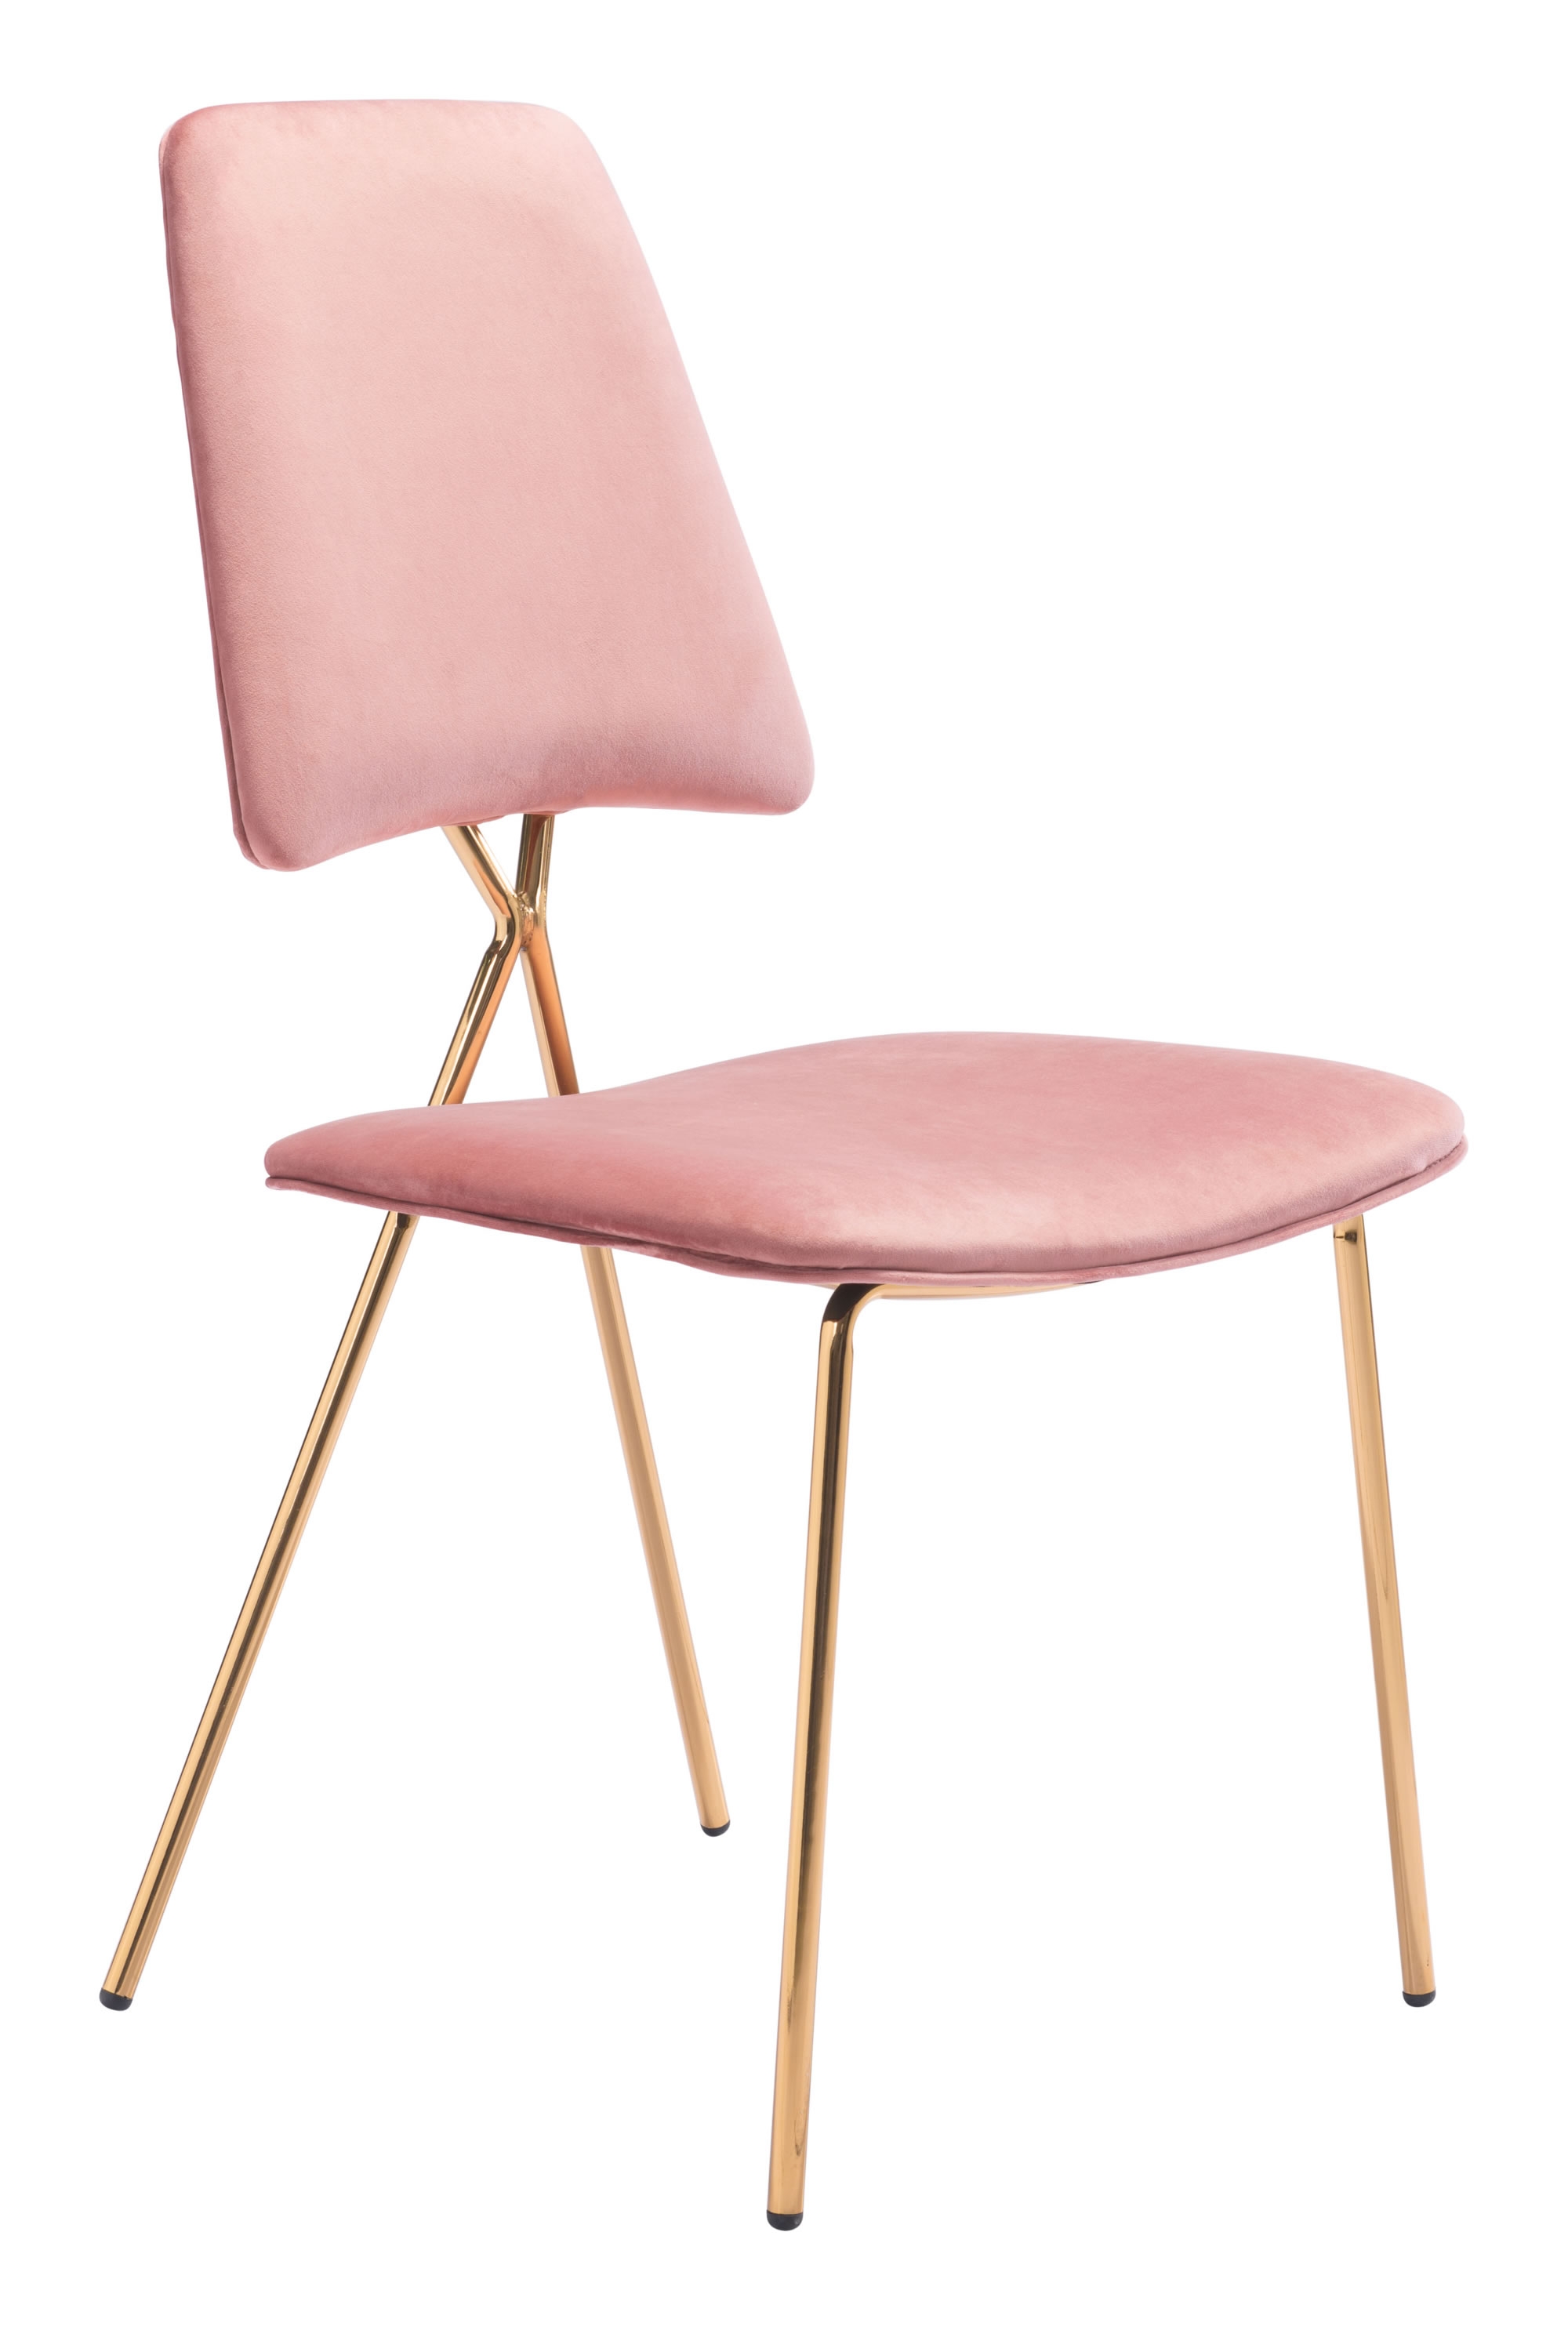 Chloe Dining Chair Pink & Gold (Set of 2) - Image 0